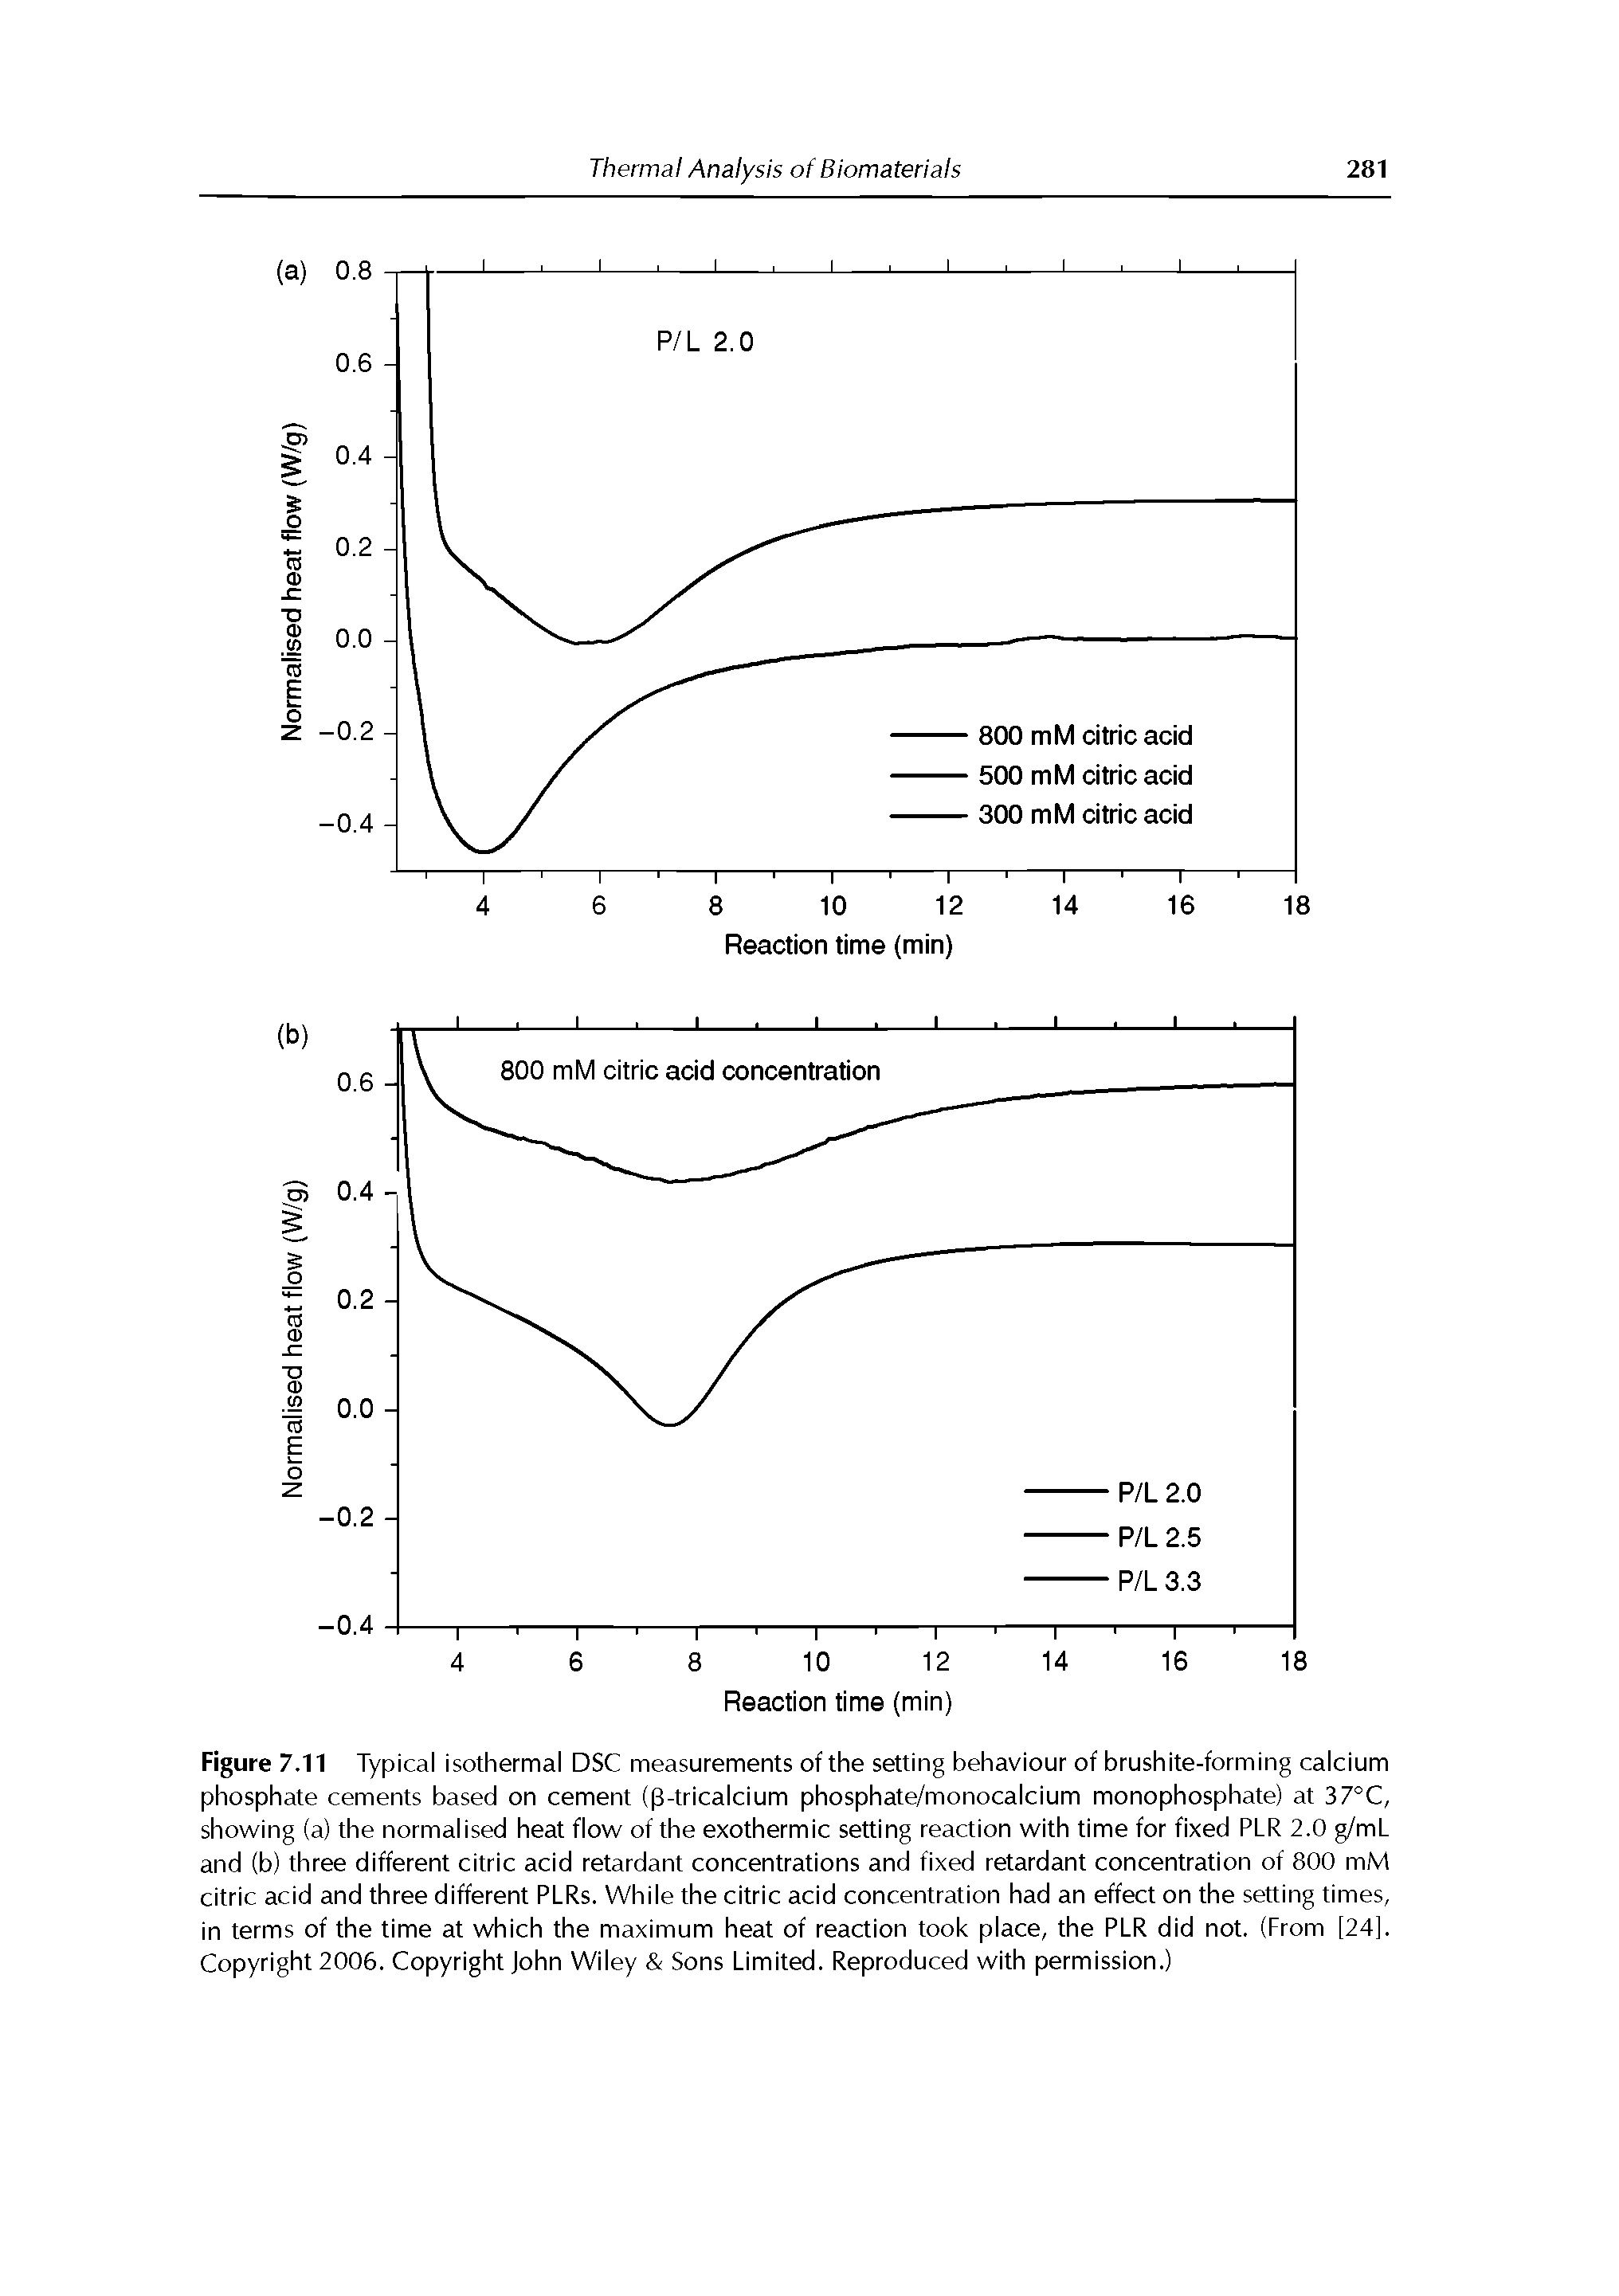 Figure7.11 Typical isothermal DSC measurements of the setting behaviour of brushite-forming calcium phosphate cements based on cement ( 3-tricalcium phosphate/monocalcium monophosphate) at 37°C, showing (a) the normalised heat flow of the exothermic setting reaction with time for fixed PLR 2.0 g/mL and (b) three different citric acid retardant concentrations and fixed retardant concentration of 800 mM citric acid and three different PLRs. While the citric acid concentration had an effect on the setting times, in terms of the time at which the maximum heat of reaction took place, the PLR did not. (From [24], Copyright 2006. Copyright John Wiley Sons Limited. Reproduced with permission.)...